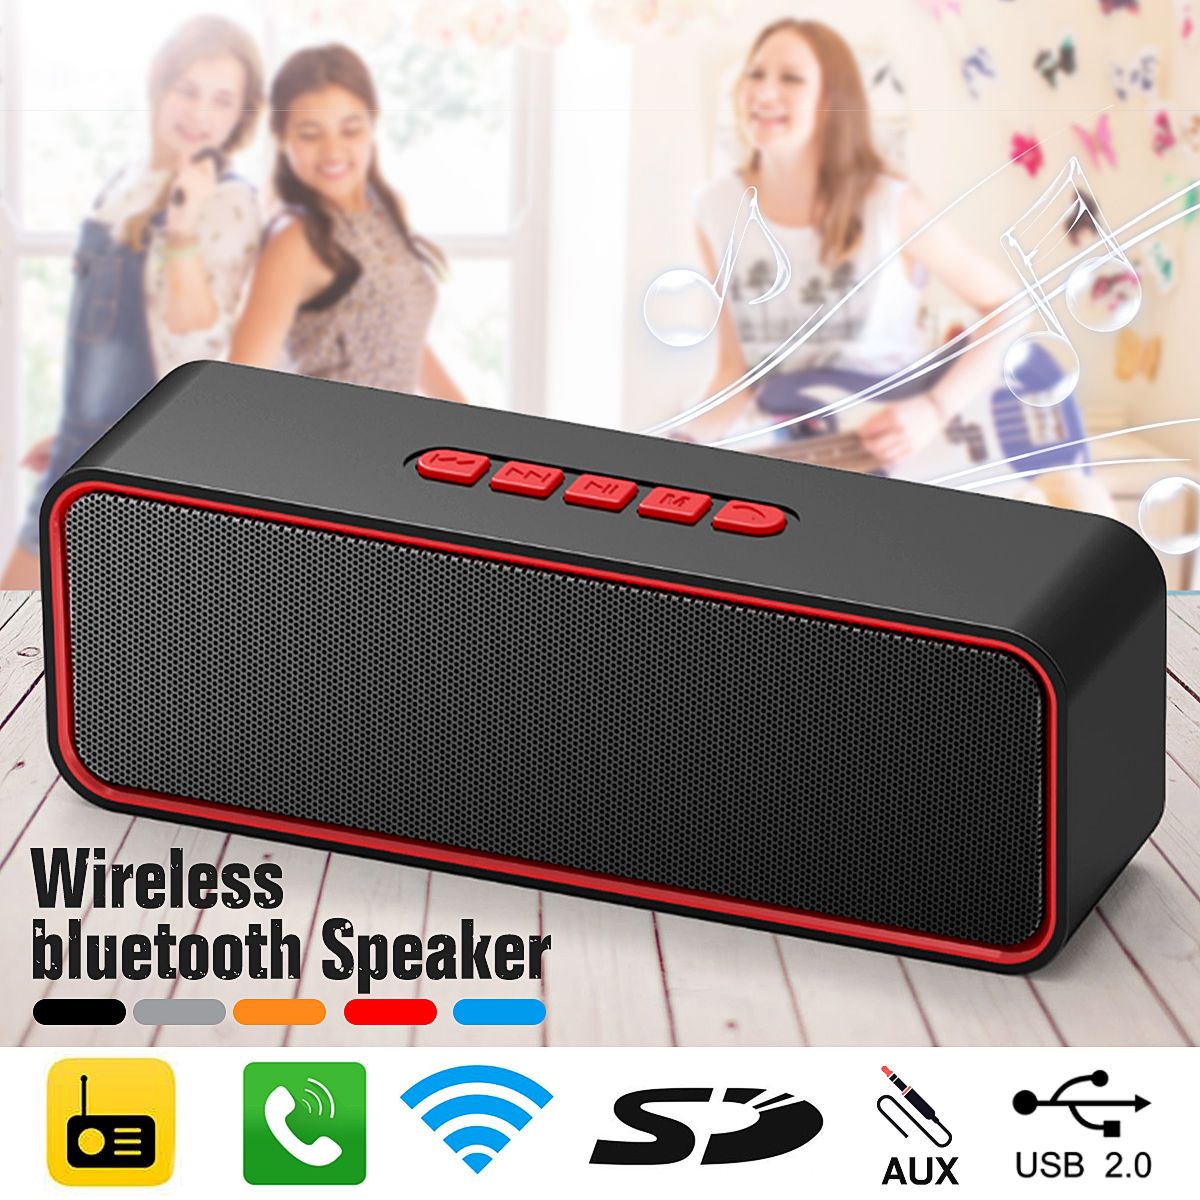 Portable-Wireless-bluetooth-Speaker-Soundbar-Subwoofer-Stereo-TF-Card-TWS-Outdoor-Speaker-with-Mic-1555194